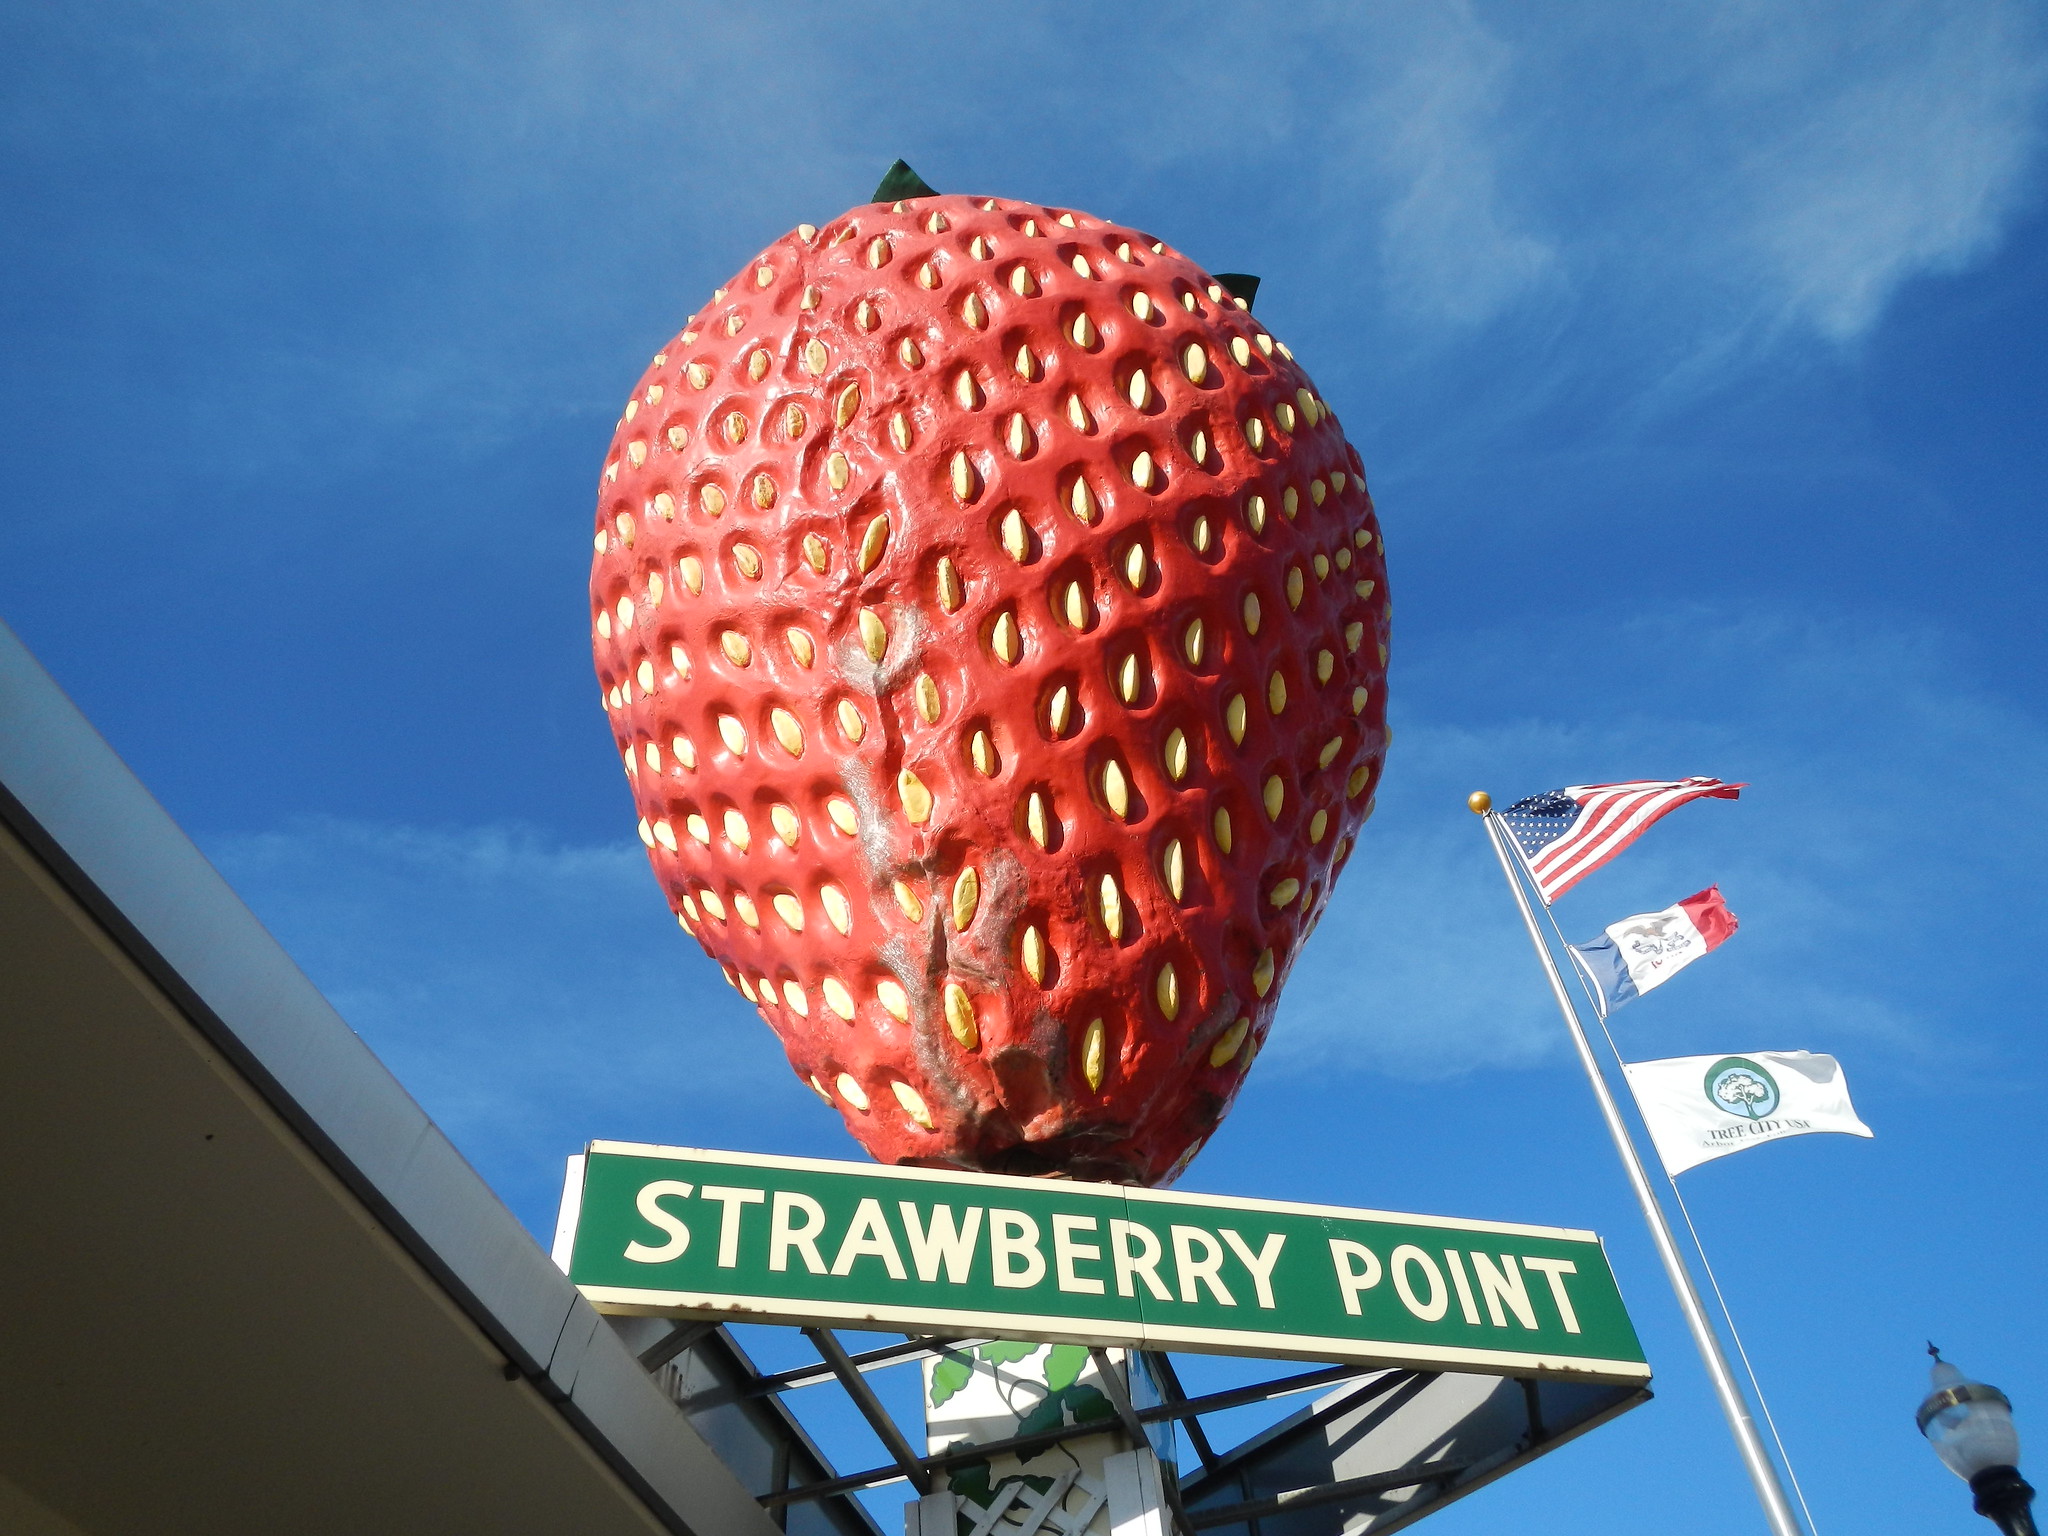 The World's Largest Strawberry Is Here In Strawberry Point, Iowa